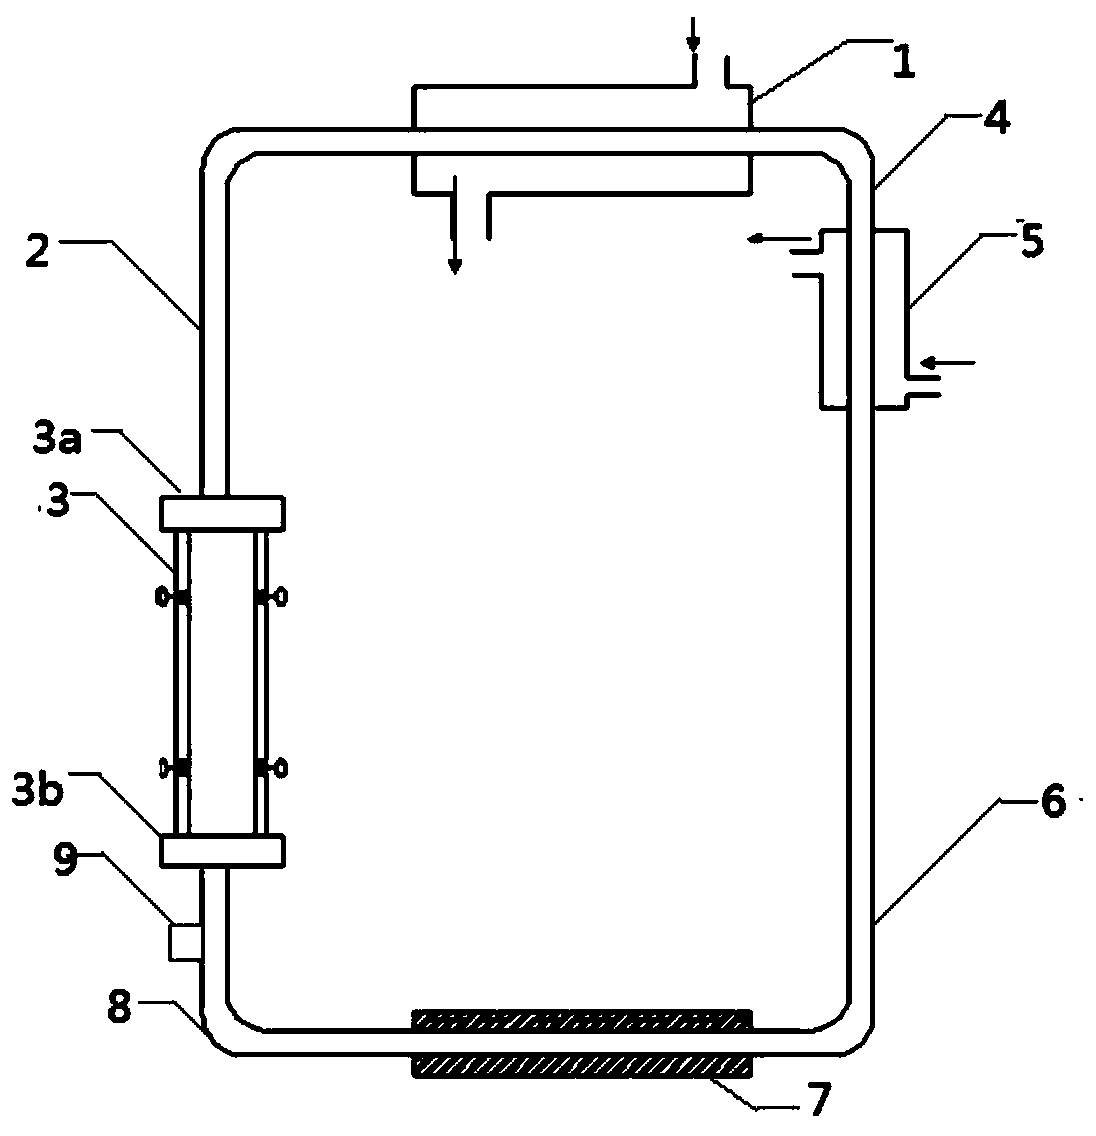 Visual analysis method for flow oscillation after gas is injected into lead bismuth fluid